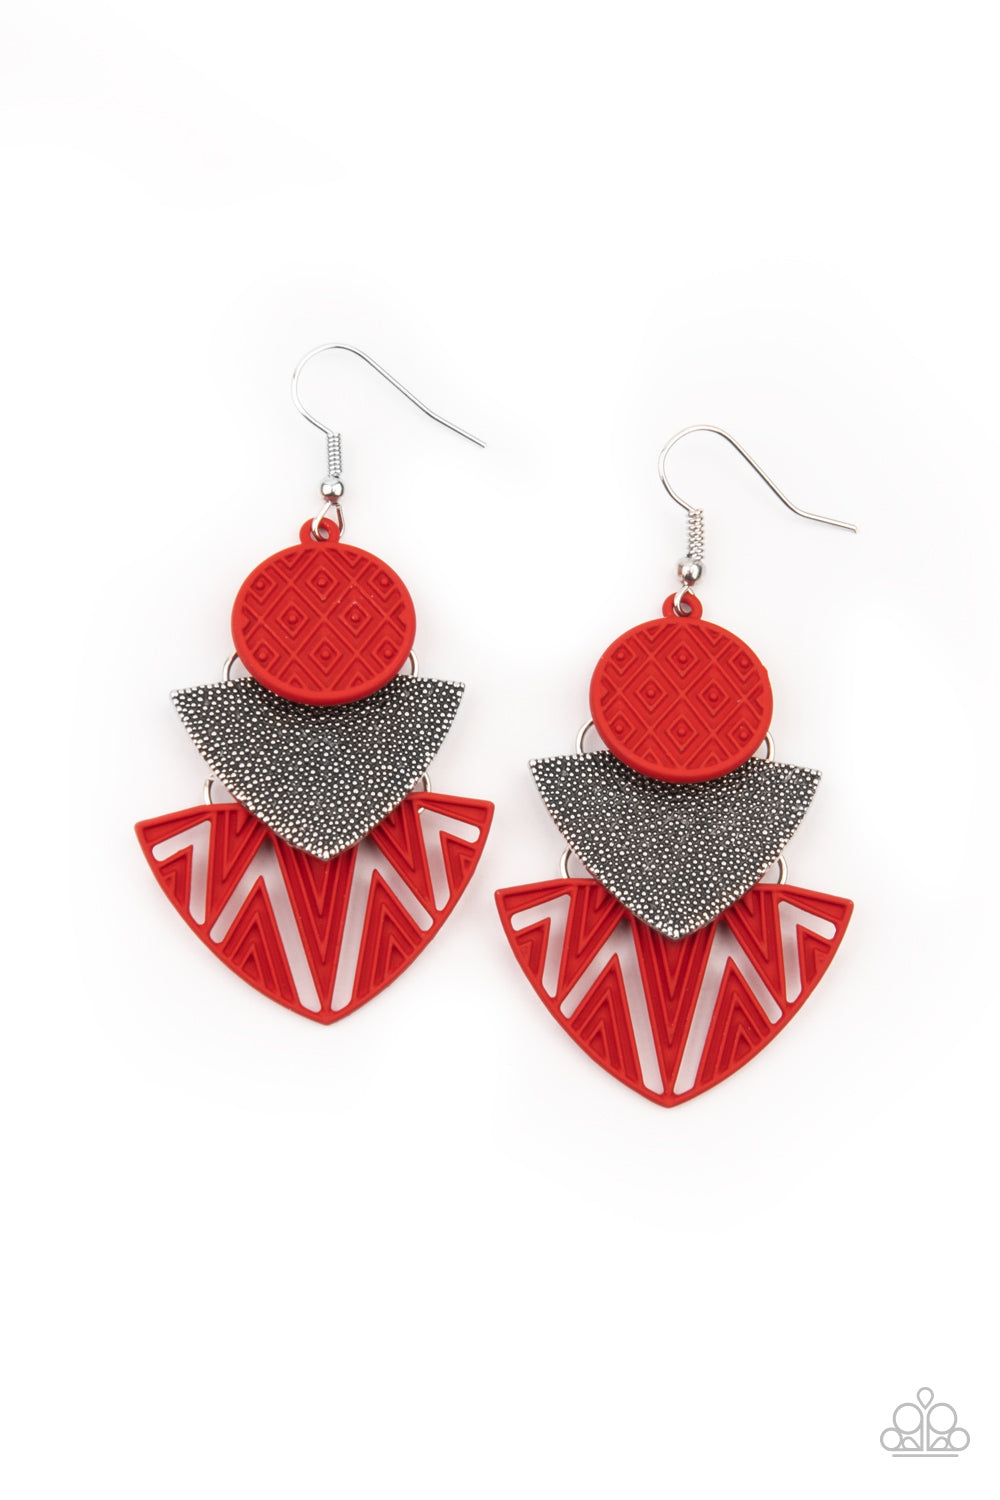 Paparazzi Accessories Jurassic Juxtaposition - Red Earrings - Lady T Accessories